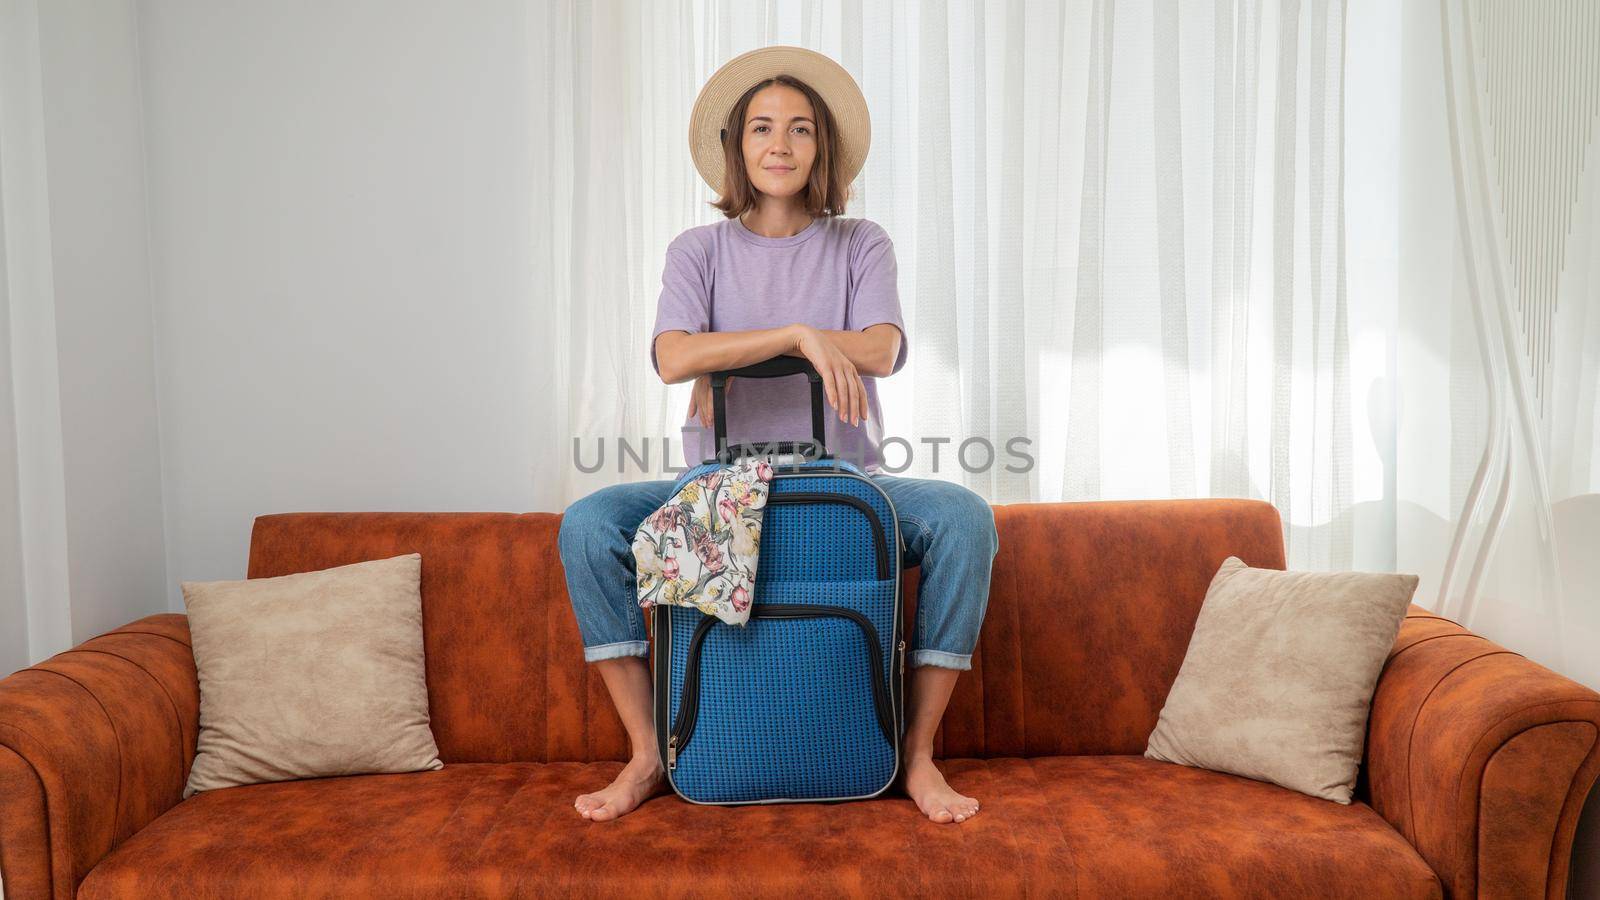 Gathering for the trip - a woman with a suitcase at home on the couch, in anticipation of the trip by voktybre